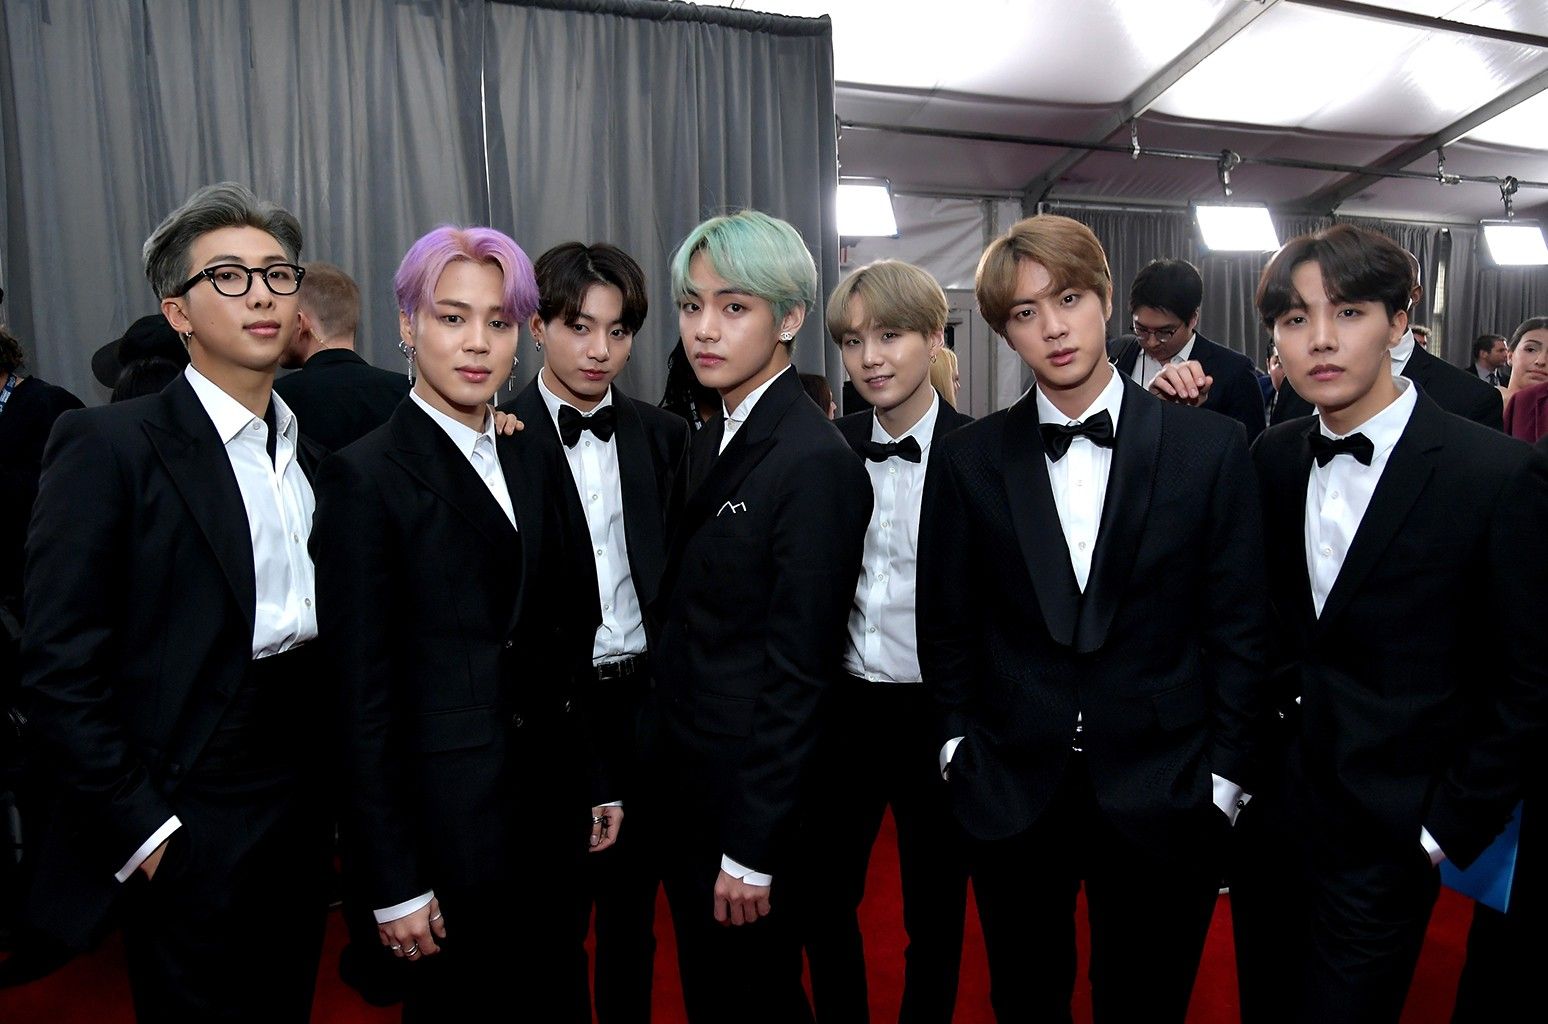 BTS Look Dapper On 2019 Grammy Awards Red Carpet: See the Pics